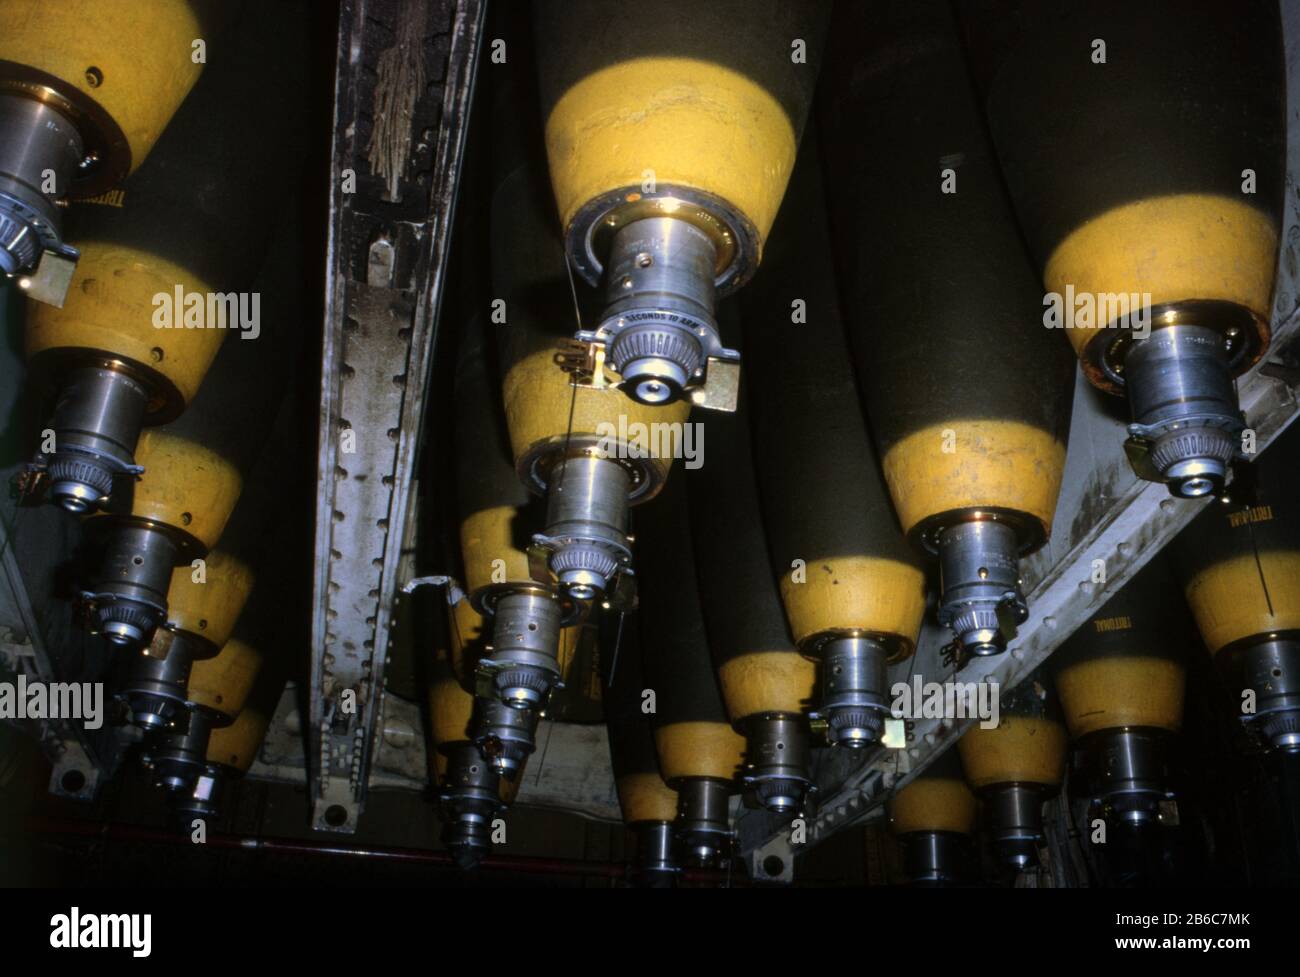 USAF United States Air Force Boeing B-52D Stratofortress con Bombarload Foto Stock